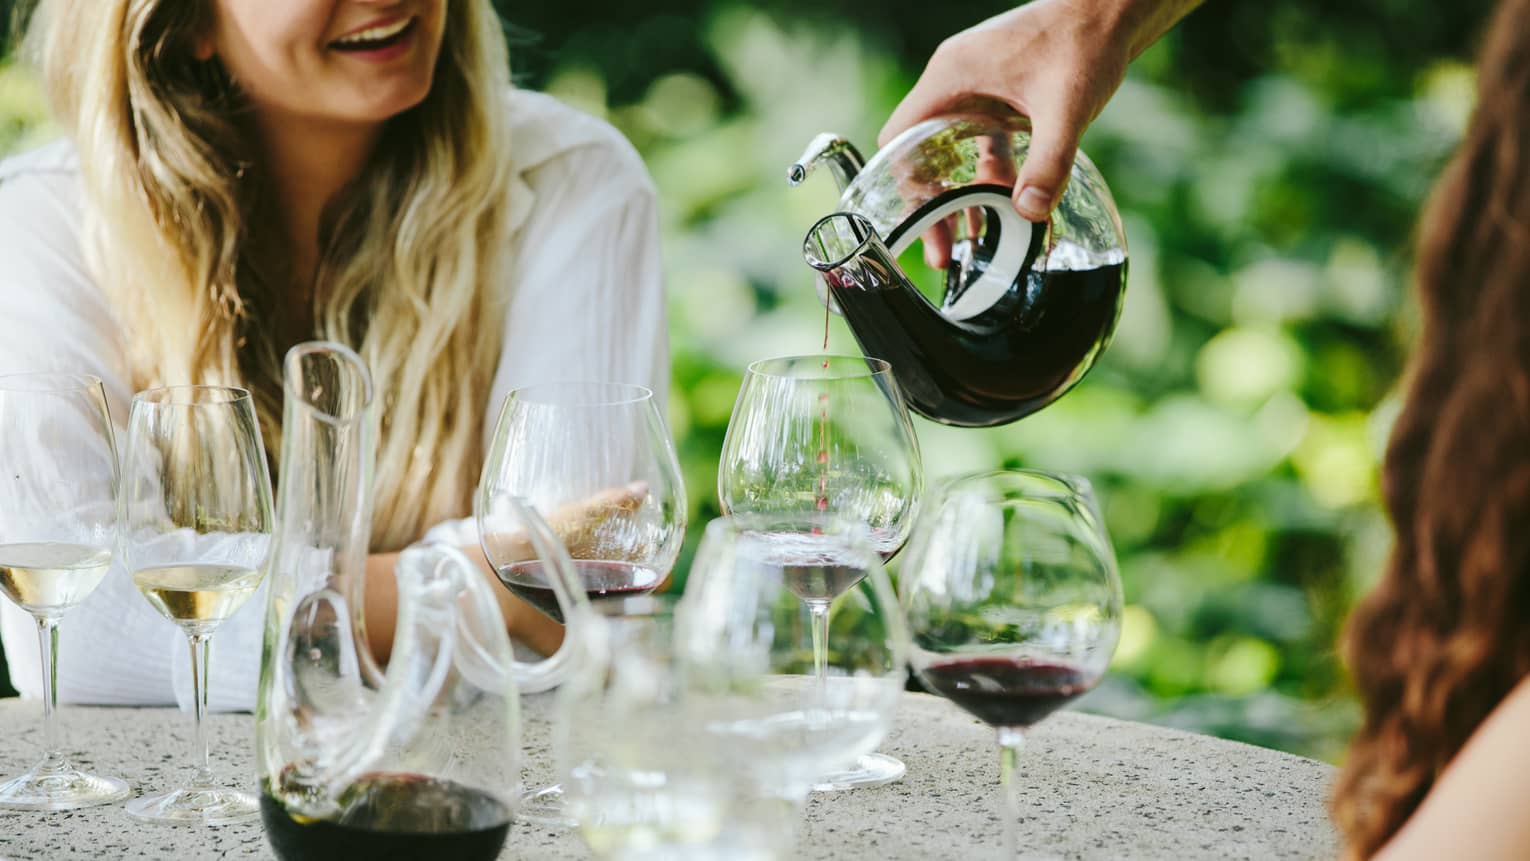 Smiling women at outdoor table, hotel staff pours red wine from artistic glass carafe